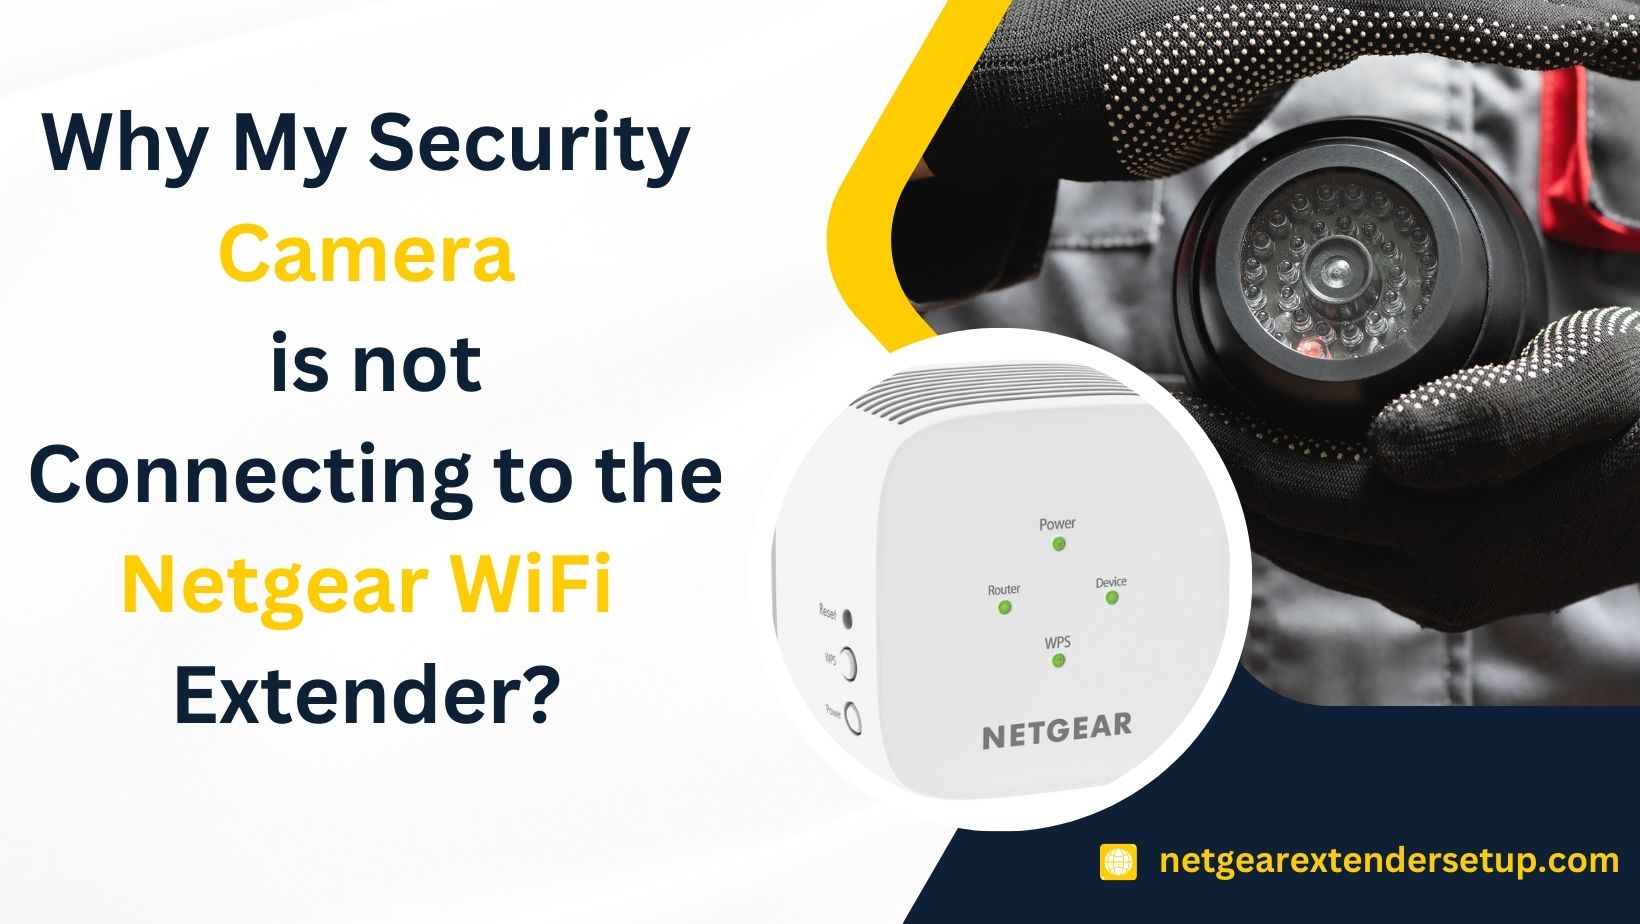 You are currently viewing Why My Security Camera is not Connecting to the Netgear WiFi Extender?